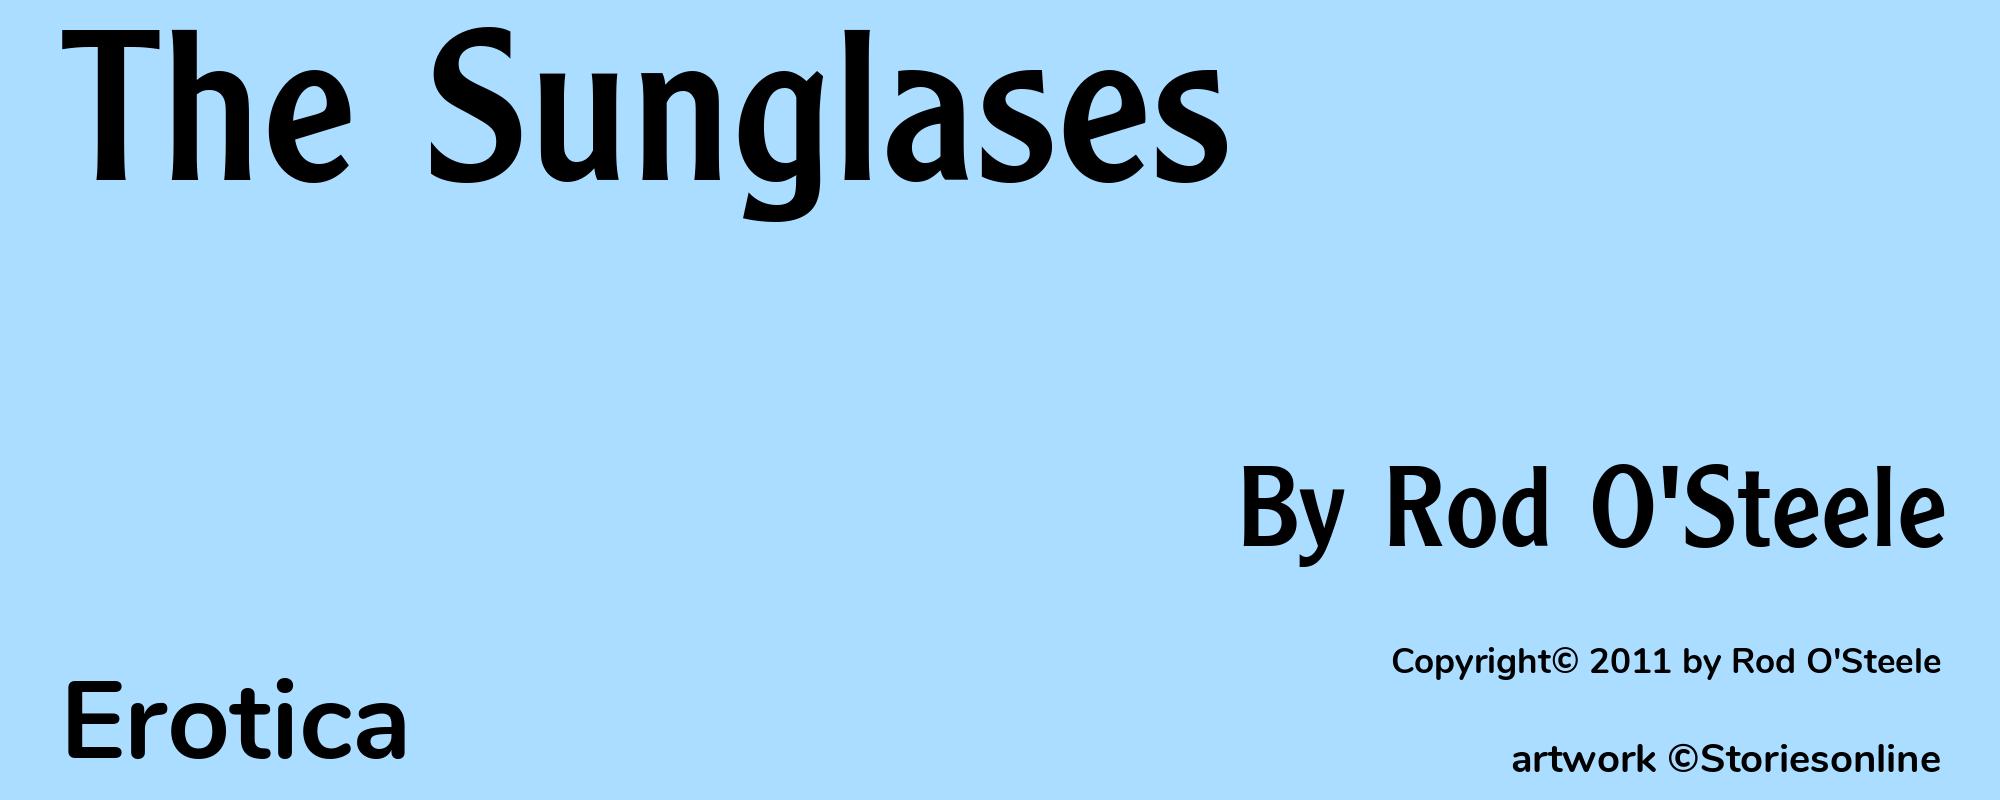 The Sunglases - Cover